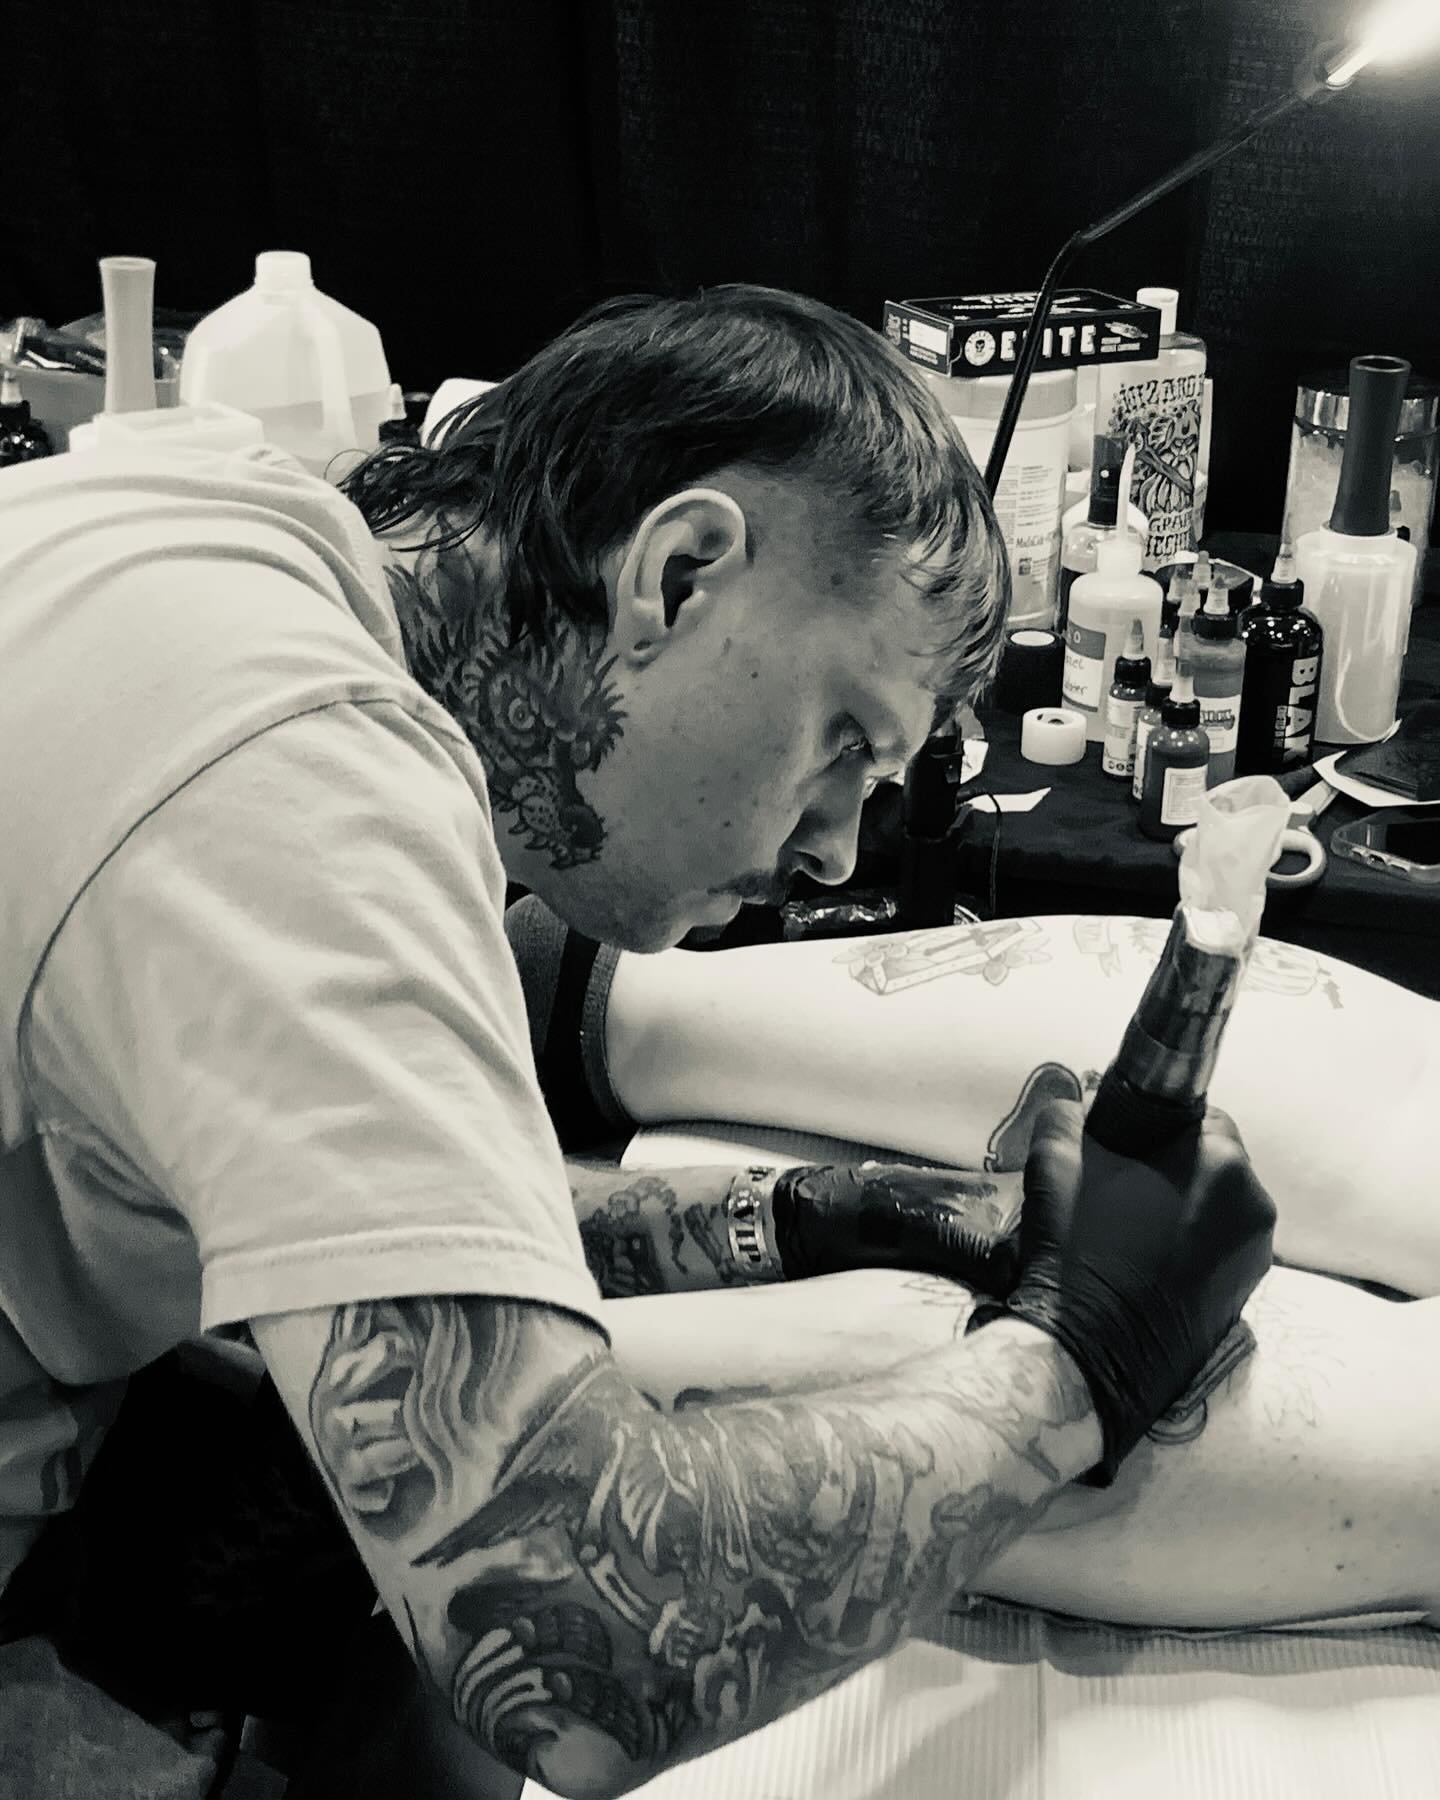 Gabe will be available for palm size or smaller walk-ins today from 3pm to 10pm! 

Lettering can be bigger than palm size, all cover ups have to be scheduled with an in-person consultation. 

First come first serve!

#gallipolis #ohio #walkins #jamme